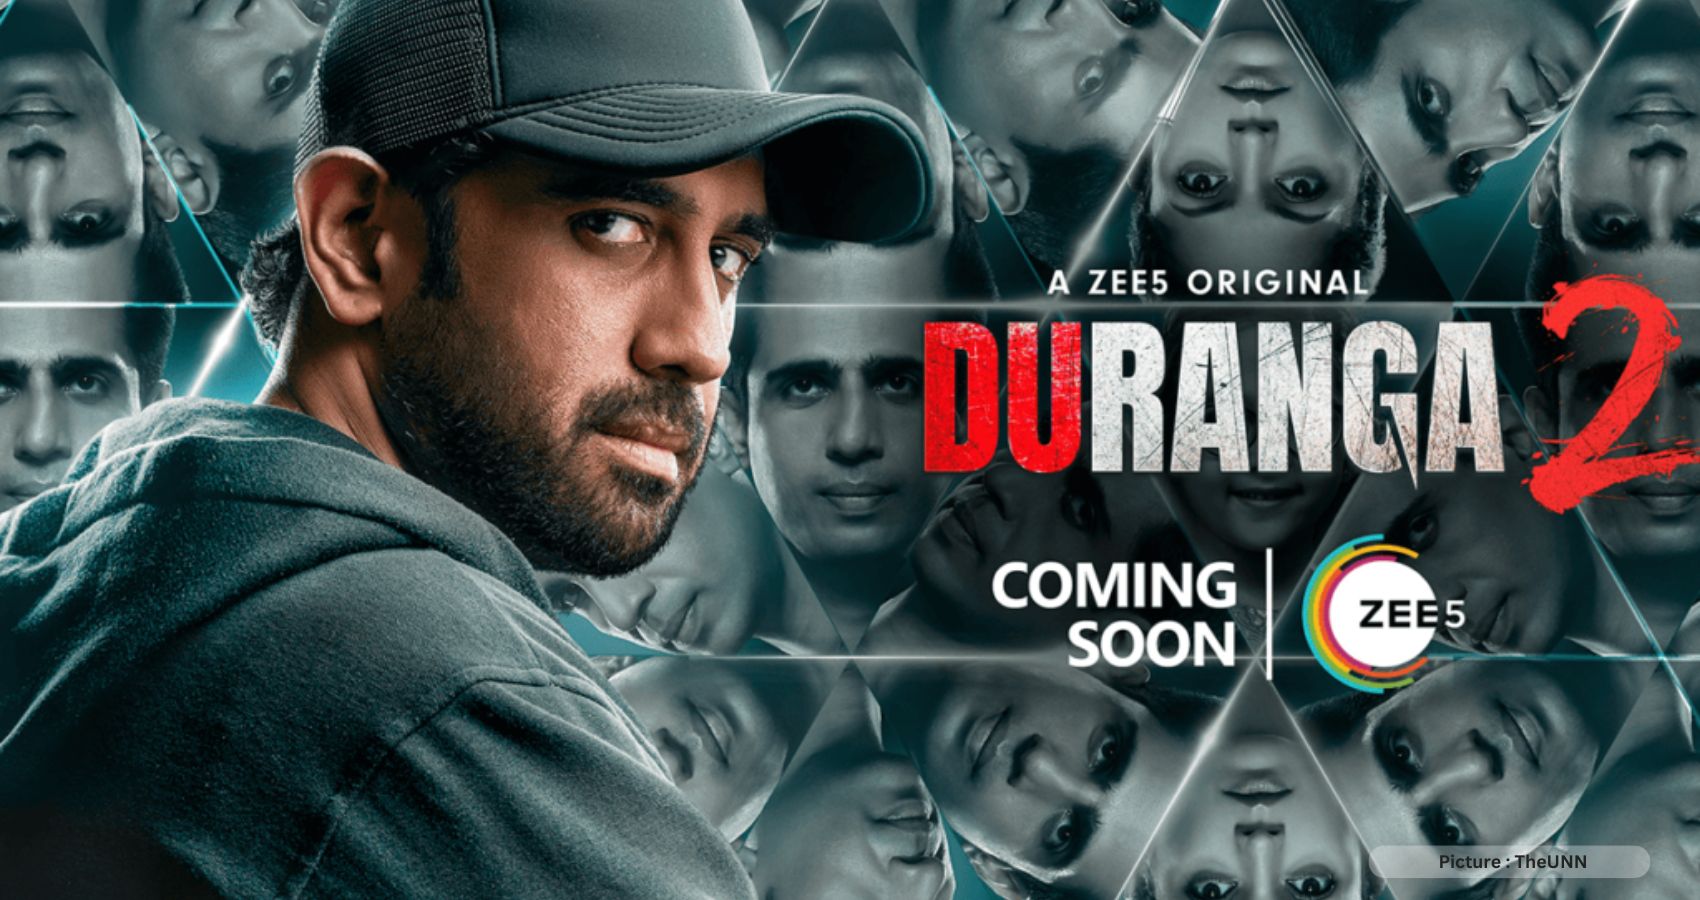 ZEE5 Global announces the much-awaited sequel of the successful romantic thriller series Duranga